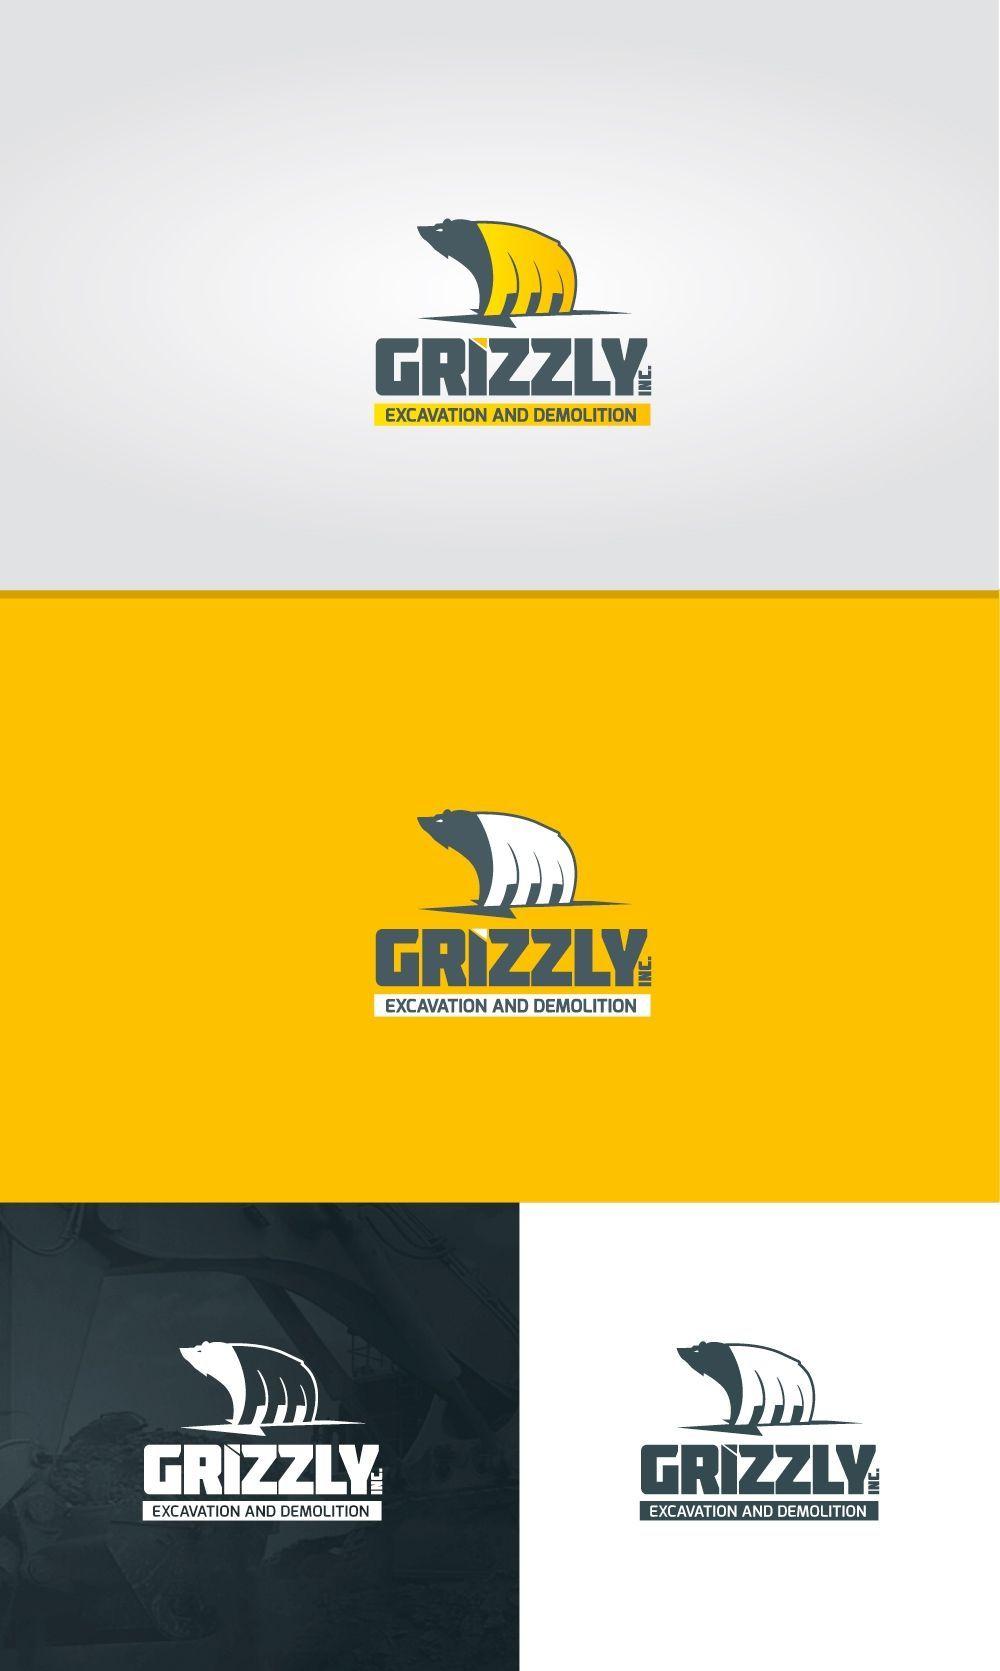 Demolition Logo - Design #146 by Kiboo ™ | Create a logo for GRIZZLY... Excavation and ...